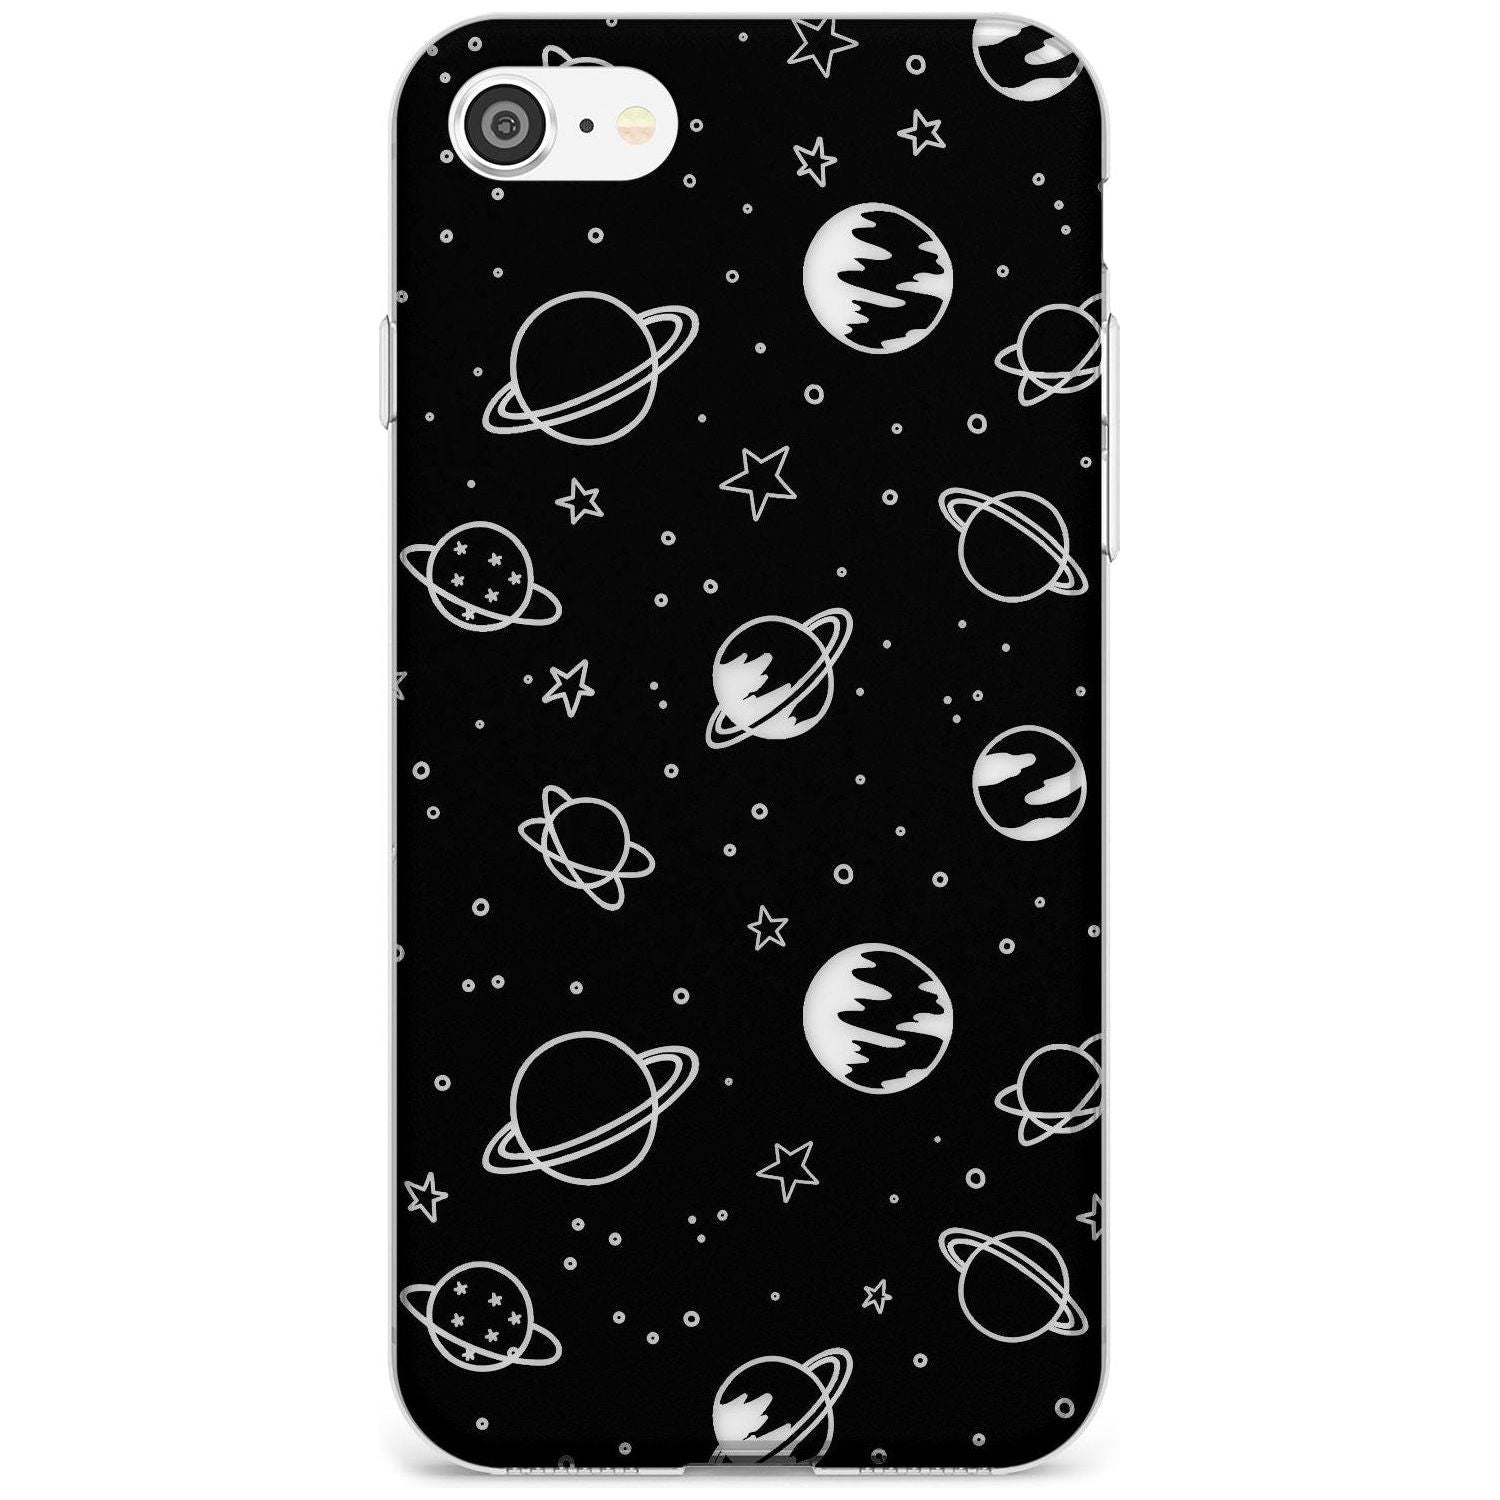 Outer Space Outlines: Clear on Black Black Impact Phone Case for iPhone SE 8 7 Plus